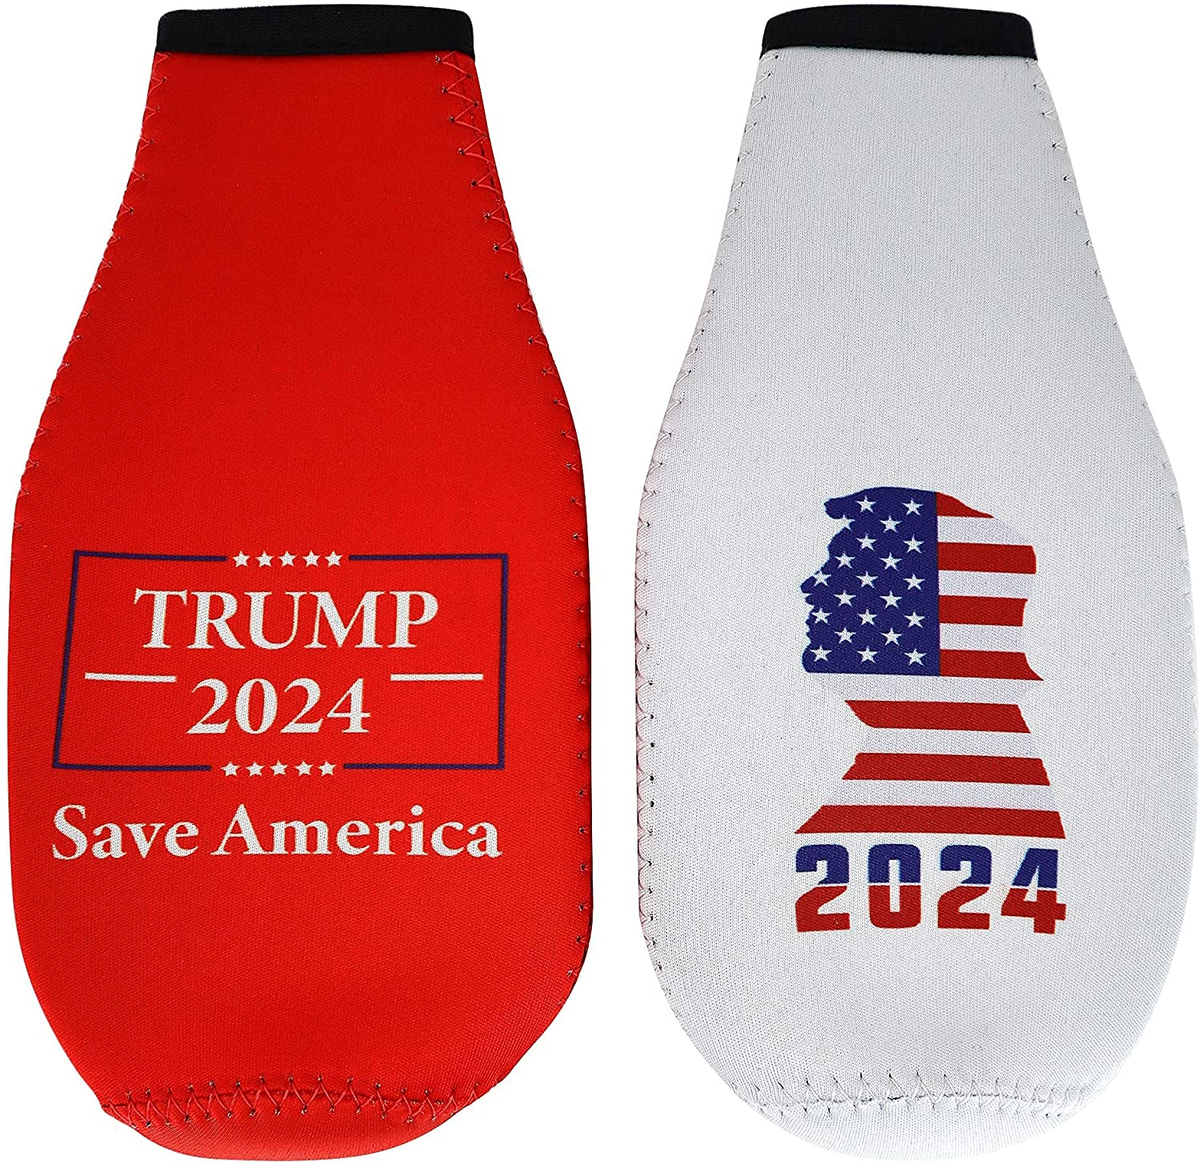  Trump 2024 Beer Can Insulator - Donald Trump MAGA Save America,  Make Liberals Cry Again,Four More Years of Liberal Tears,Insulated Cooler  Sleeve American Patriotic Gift for 16 oz. Tallboy Cans: Home